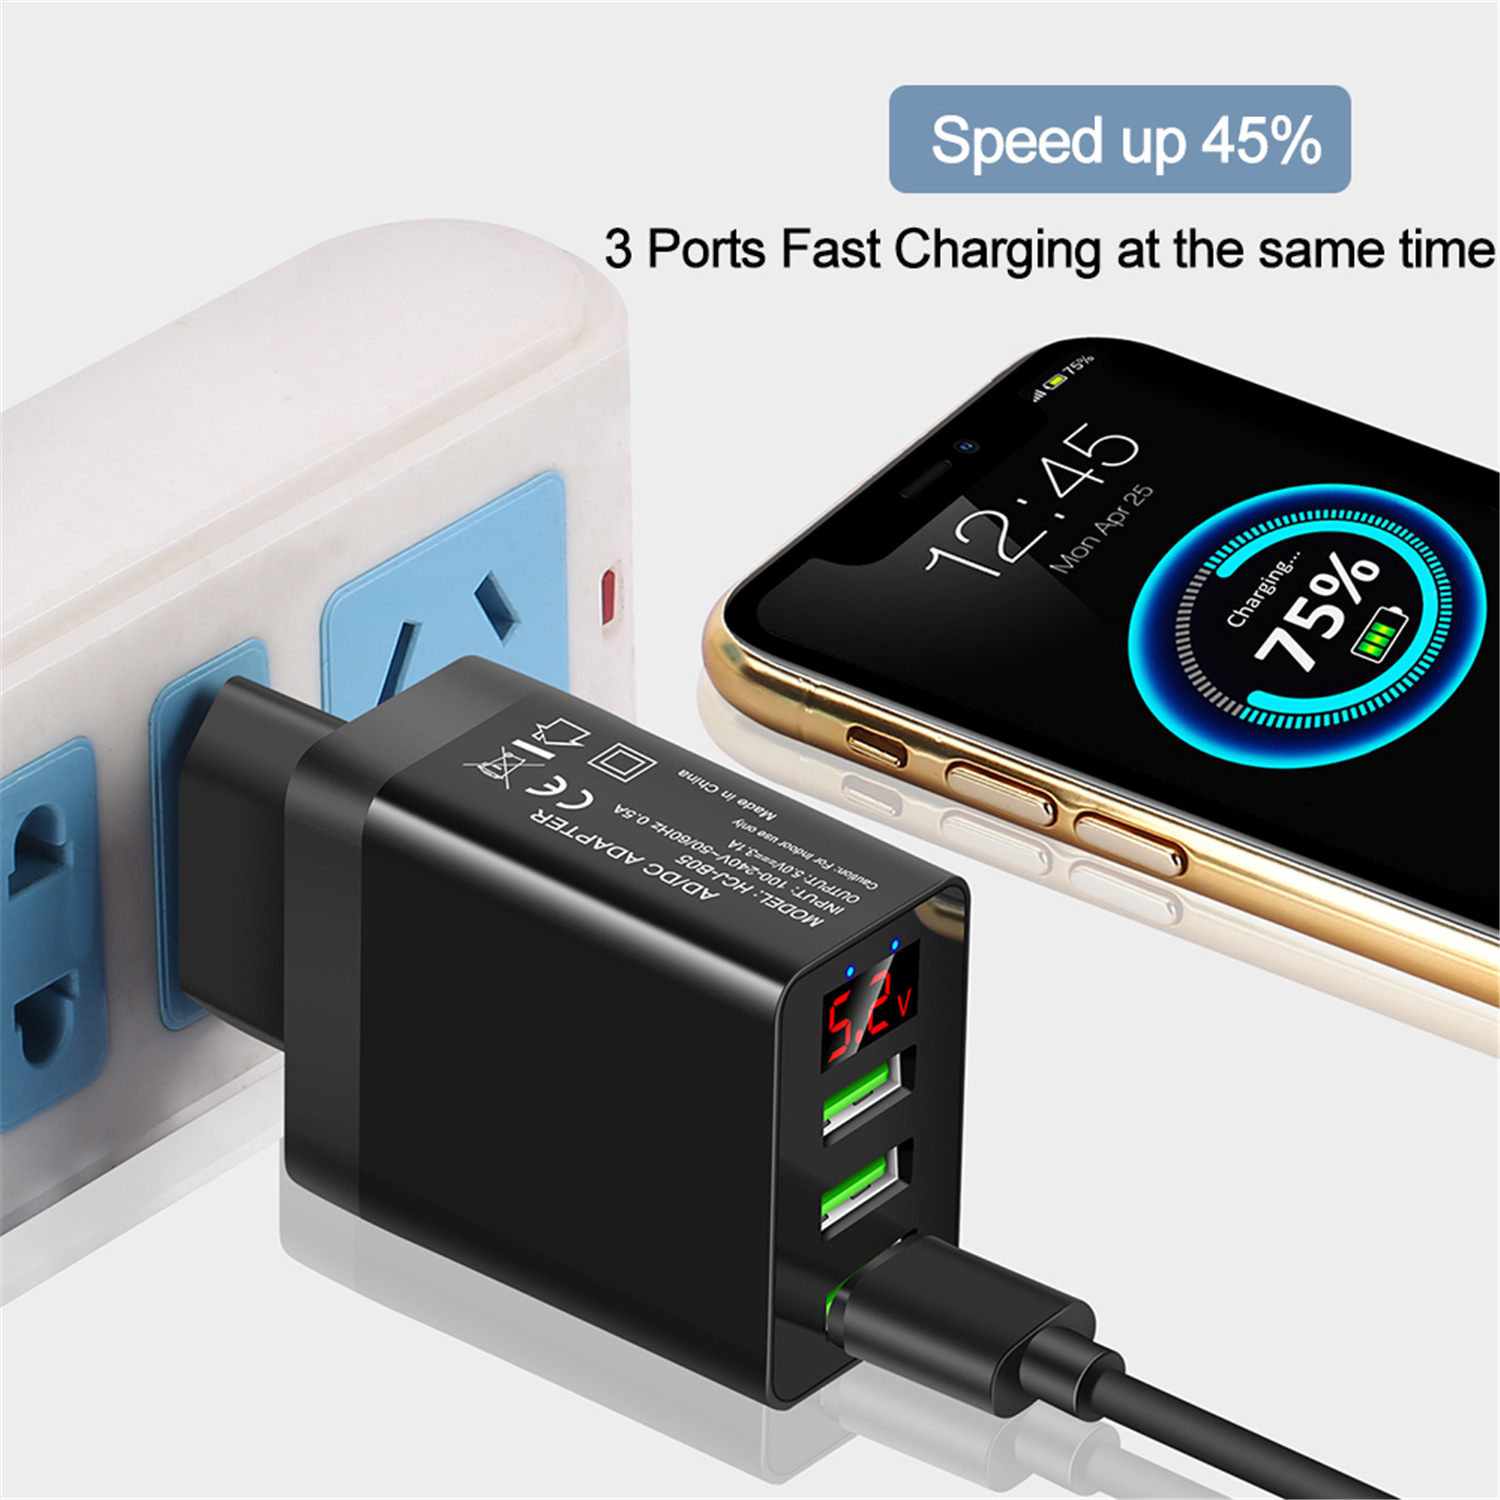 Bakeey-31A-Three-Port-LED-Display-Fast-Charging-USB-Charger-Adapter-For-iPhone-XS-11-Pro-Huawei-P30--1626361-2